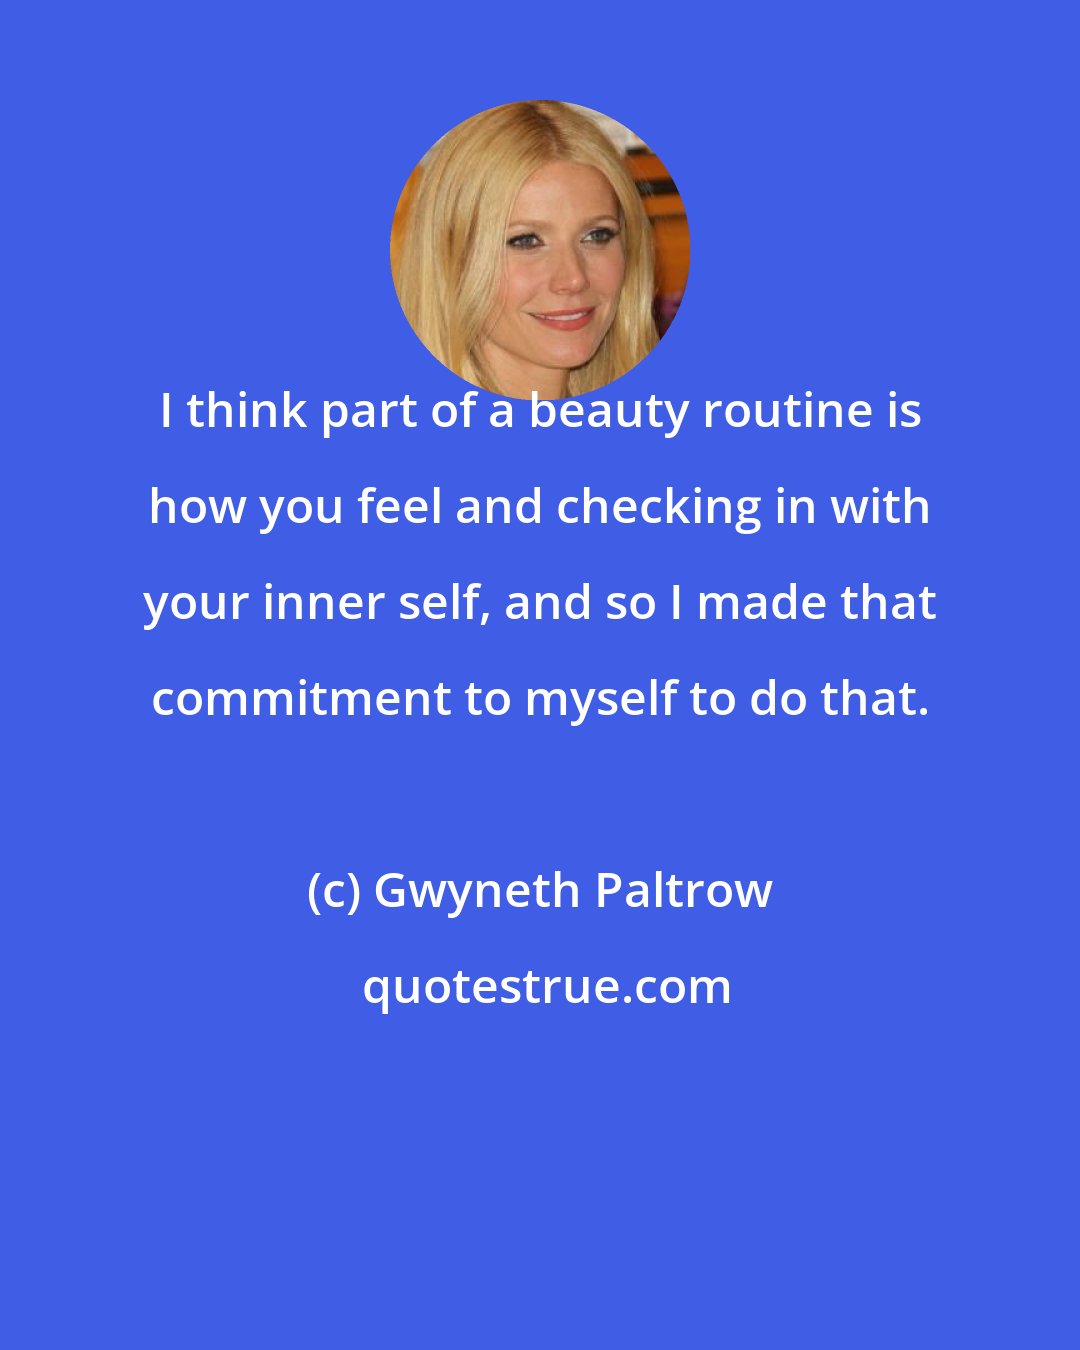 Gwyneth Paltrow: I think part of a beauty routine is how you feel and checking in with your inner self, and so I made that commitment to myself to do that.